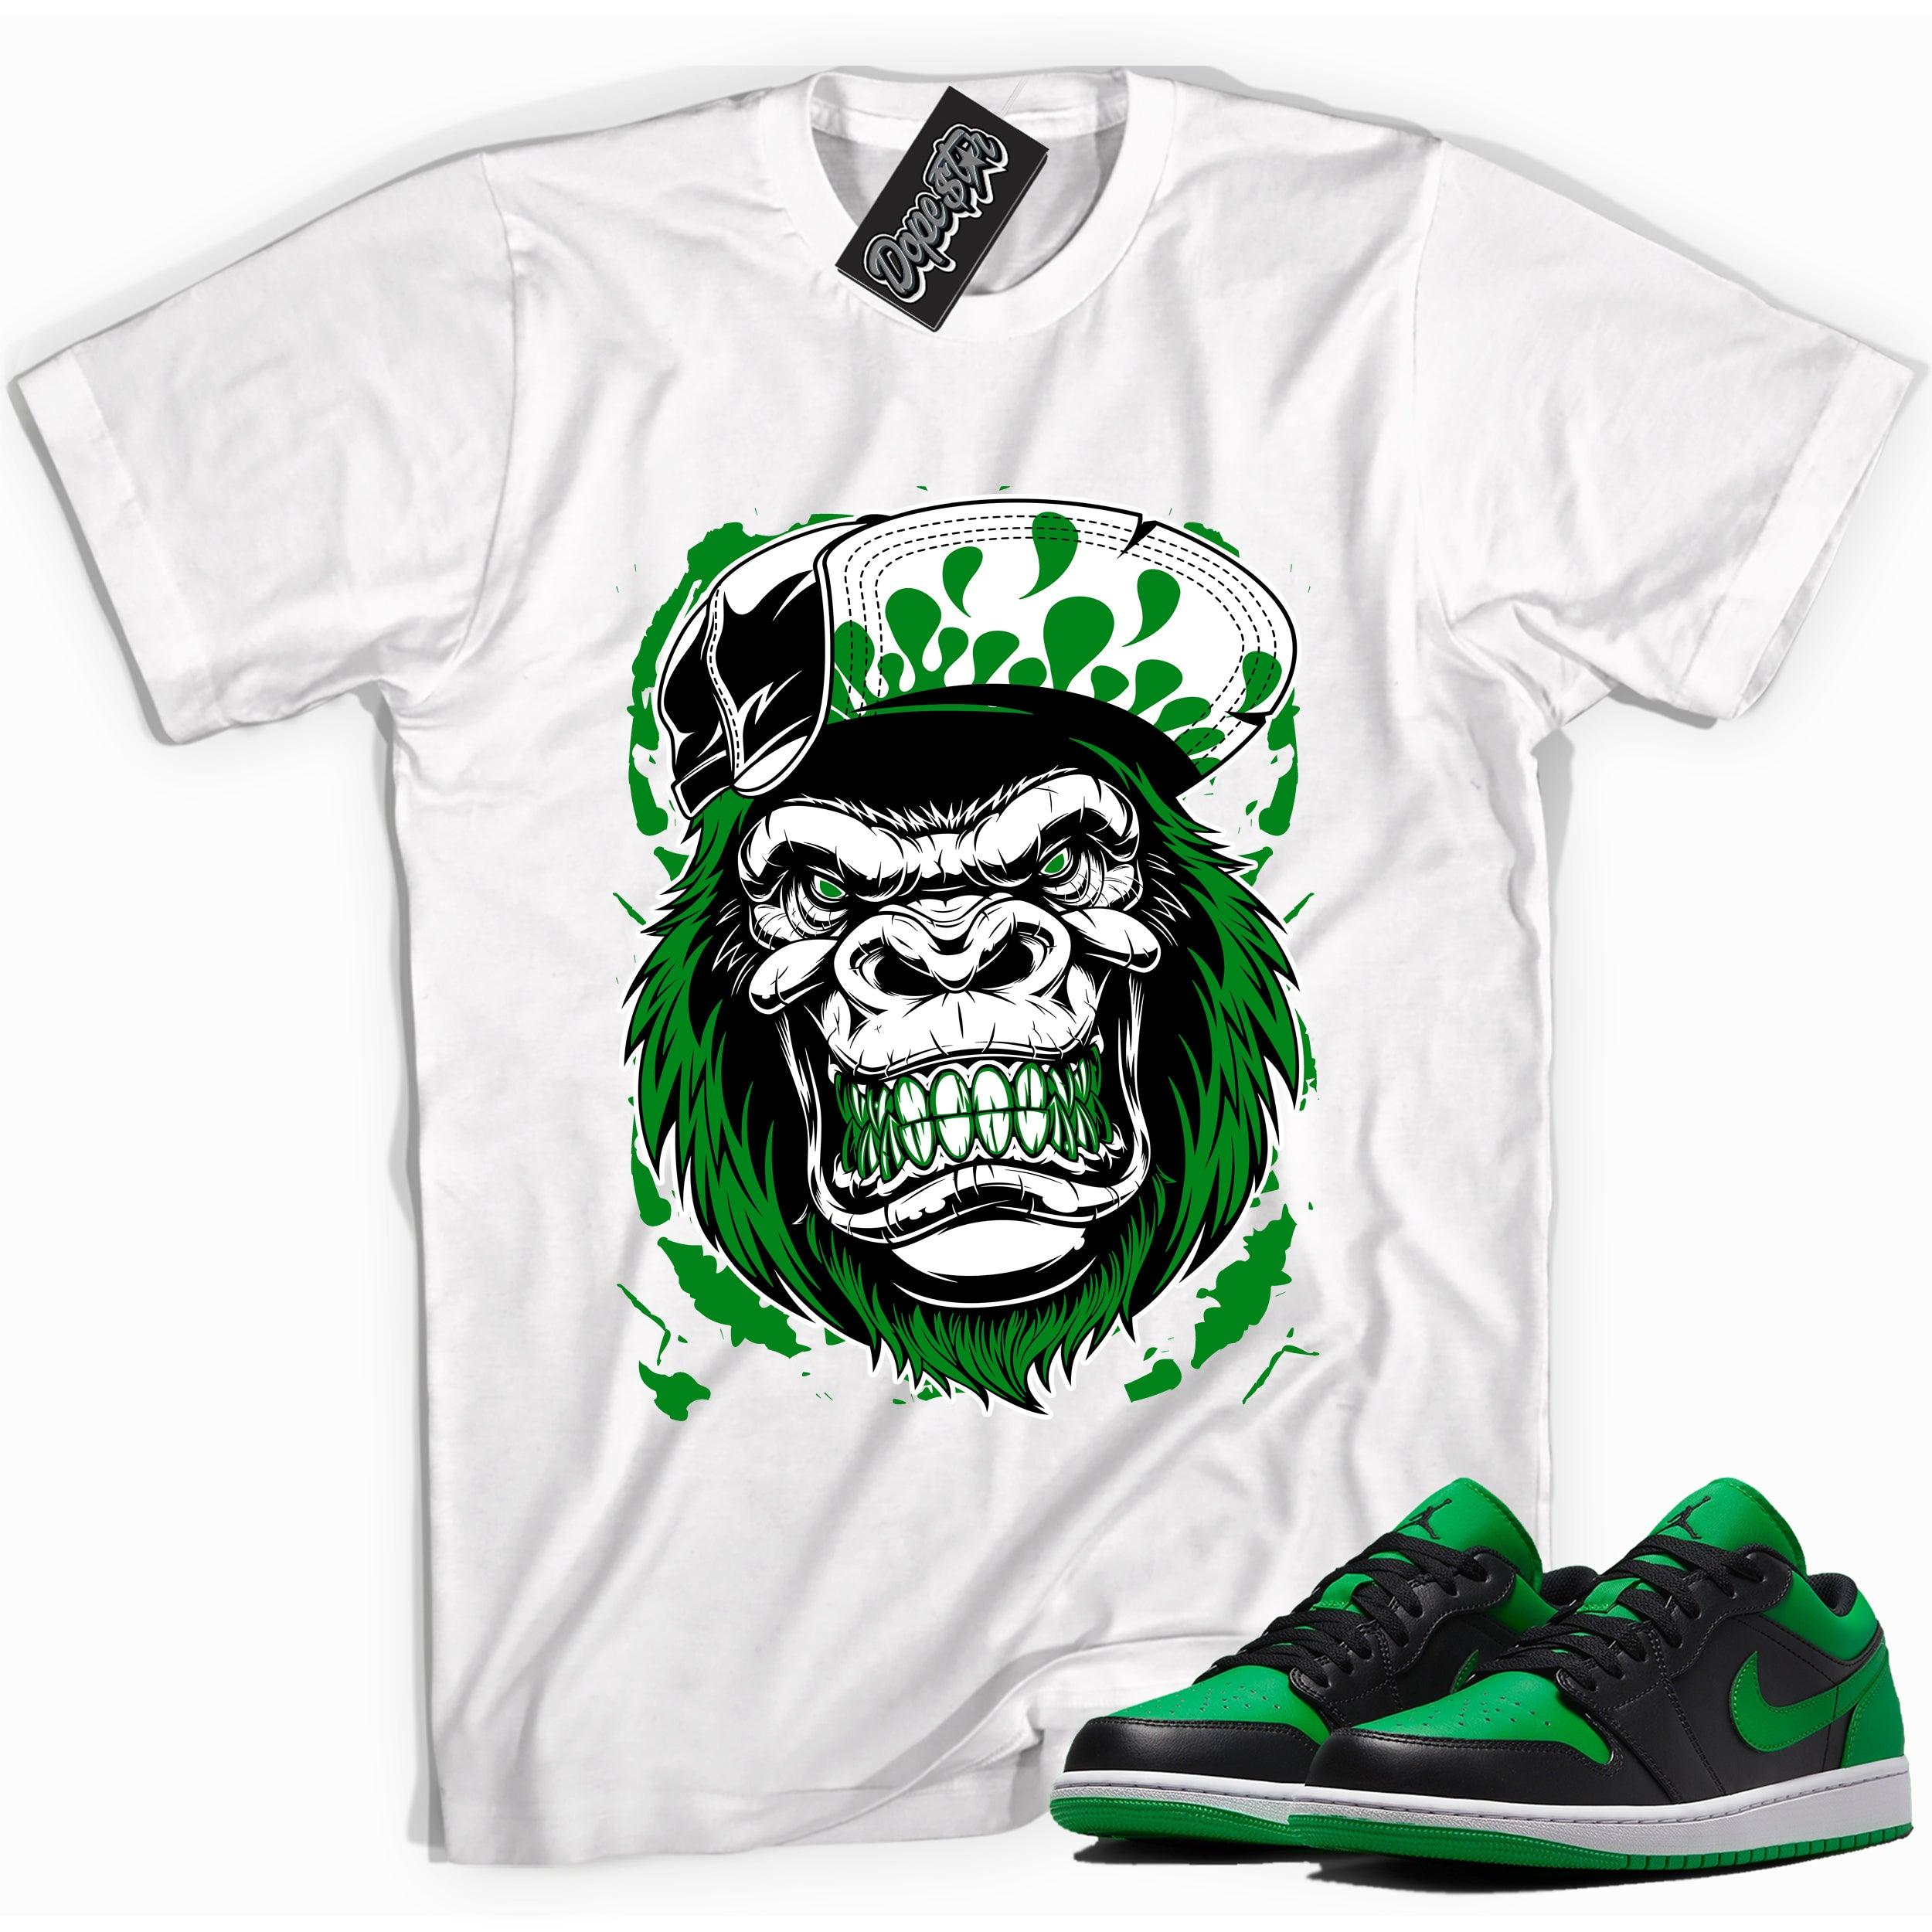 Cool white graphic tee with 'Gorilla Beast' print, that perfectly matches Air Jordan 1 Low Lucky Green sneakers